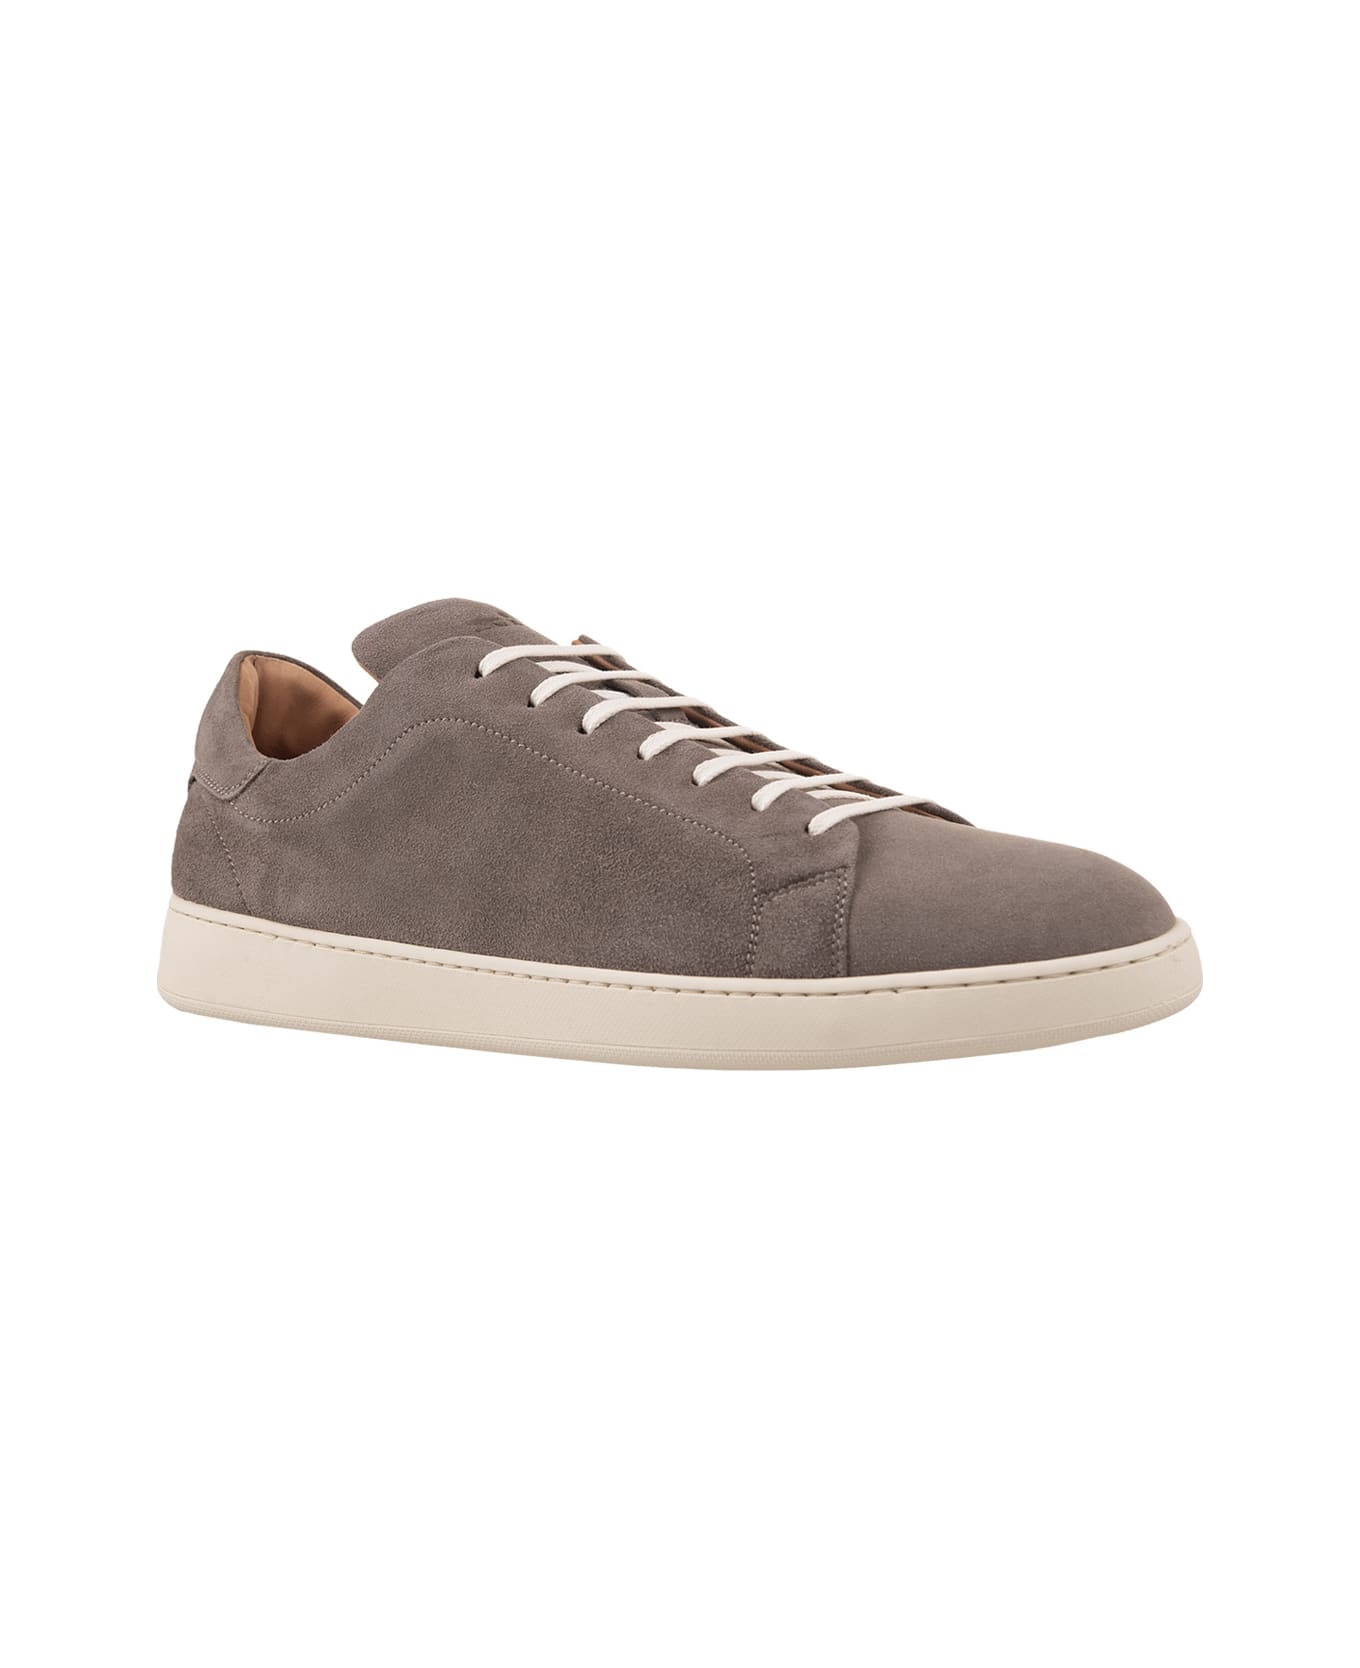 Kiton Taupe Suede Low Sneakers - Grey スニーカー